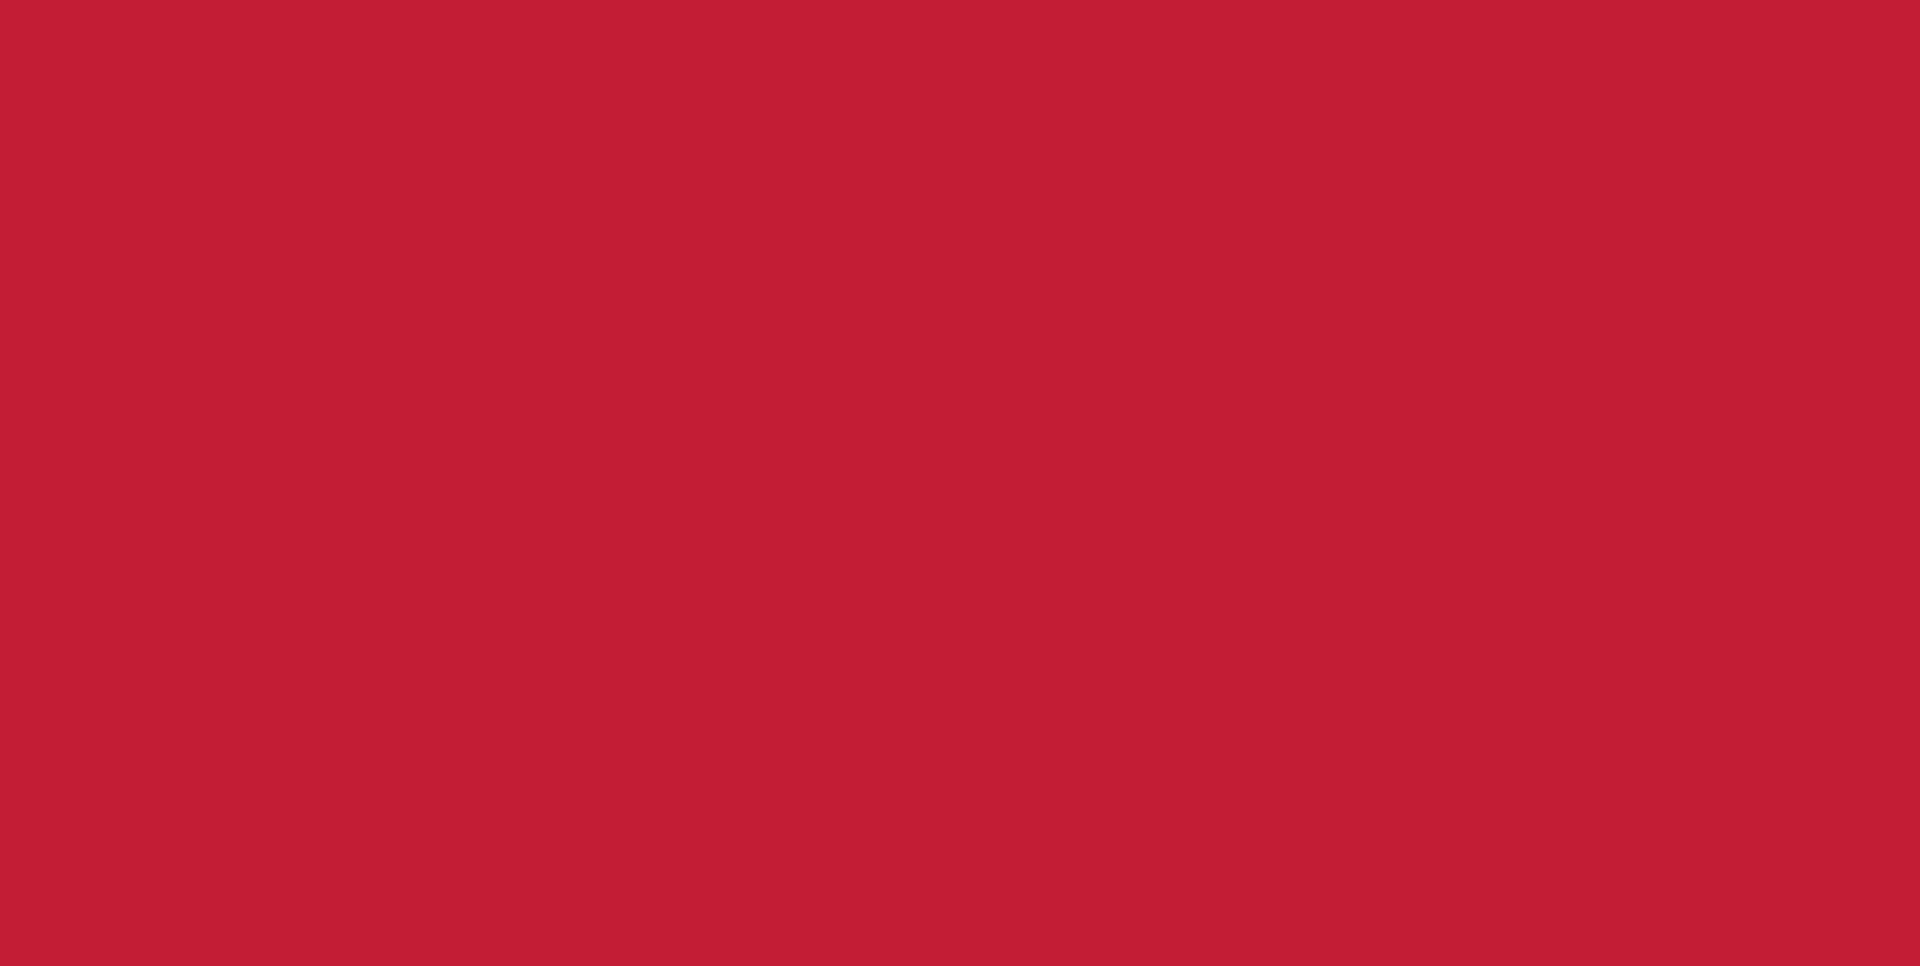 Blank red banner